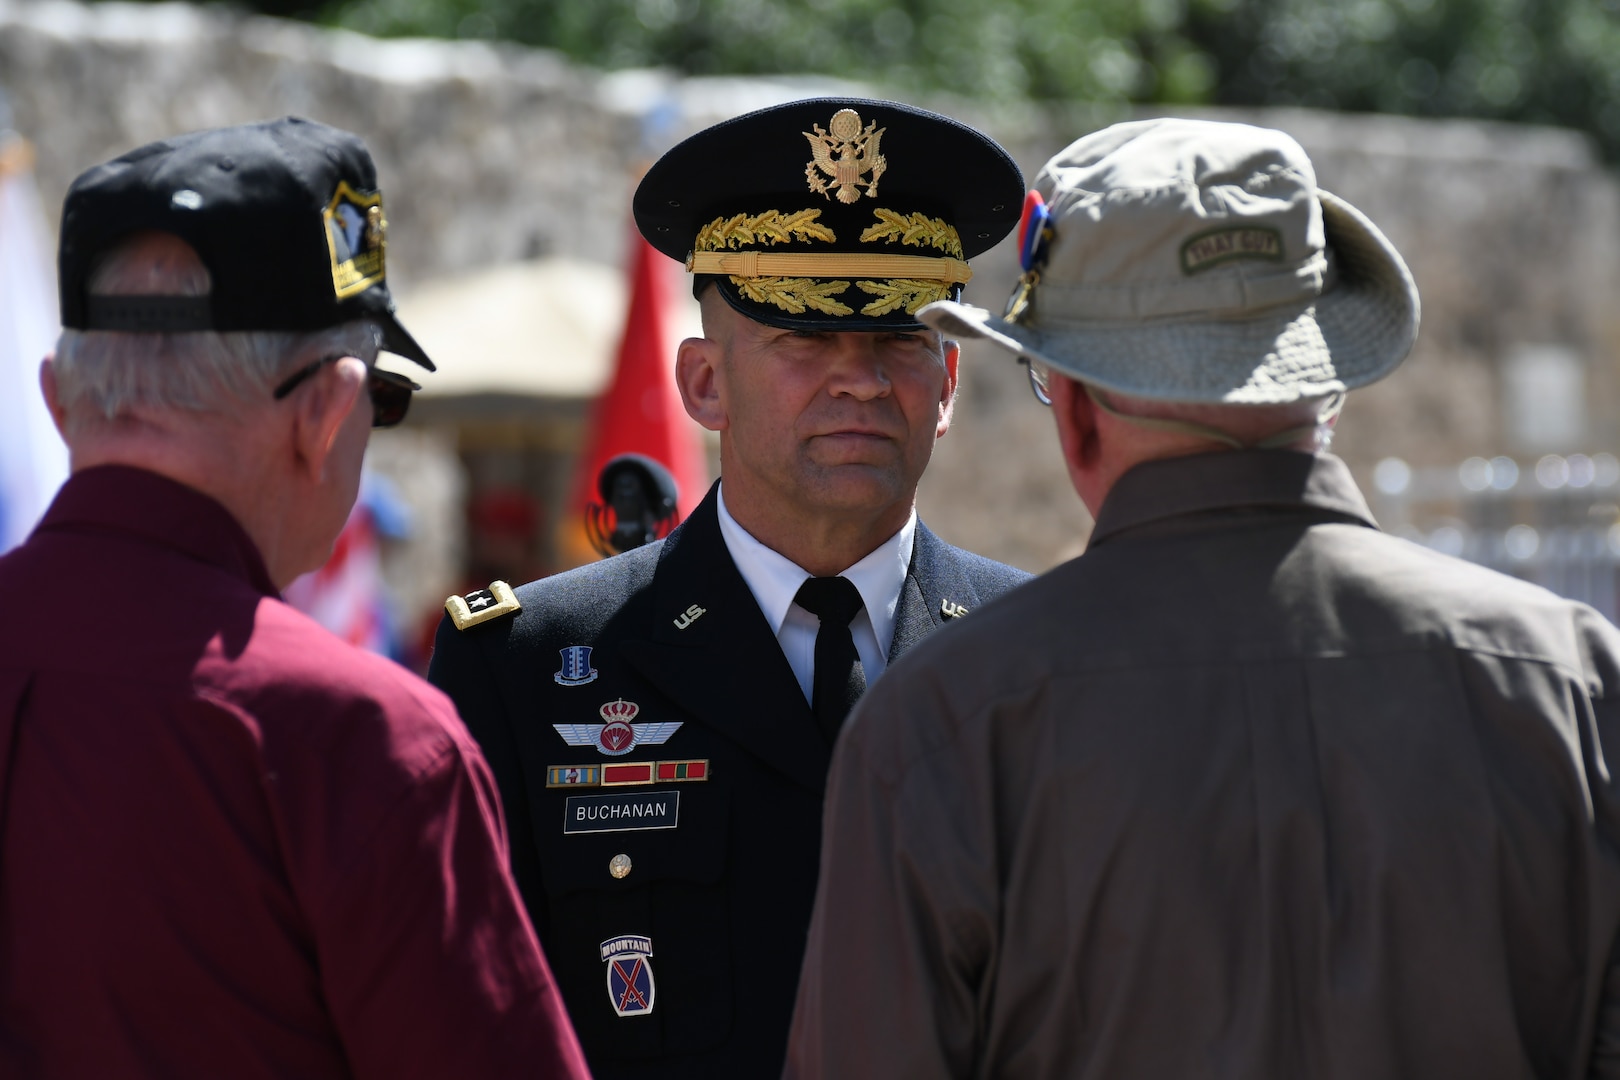 Lt. Gen. Jeffrey S. Buchanan (center), commander, U.S. Army North (Fifth Army), talks to veterans before he delivers his speech at Army Day at the Alamo April 24. Army Day at the Alamo is one of the celebrations of Fiesta 2018, a 10-day event honoring those who fought and won the battles of the Alamo and San Jacinto.